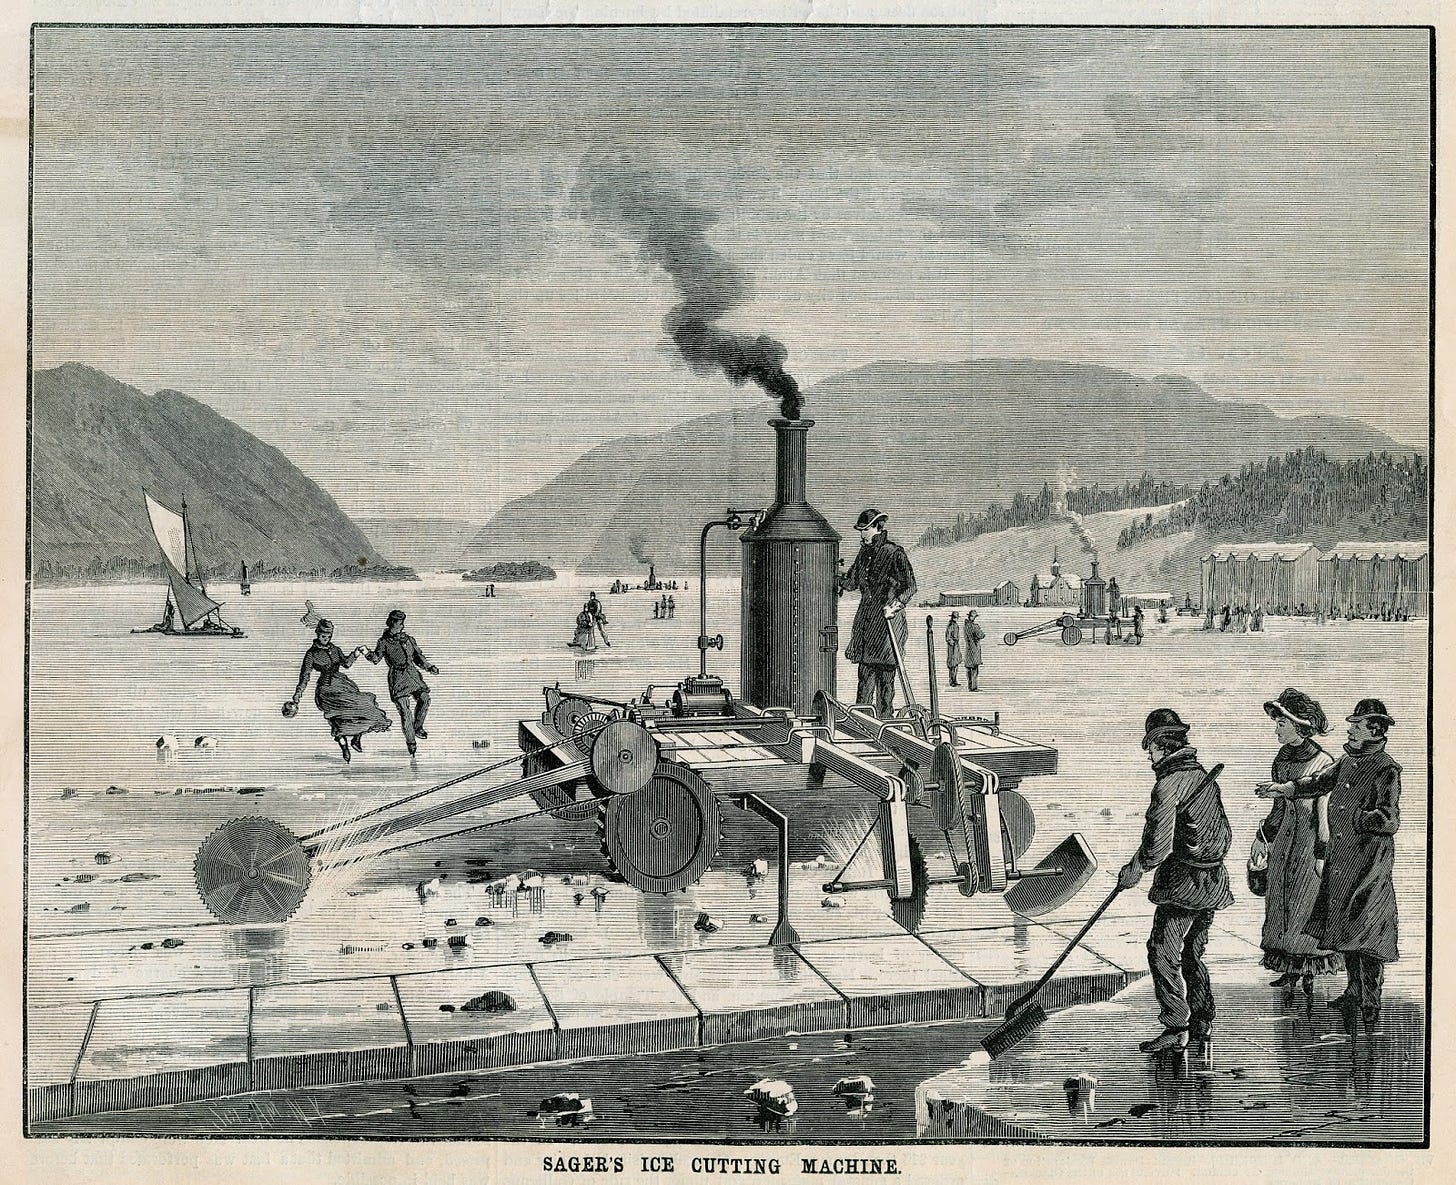 Engraving showing two Sager Ice Cutting Machines.  Source: Scientific American, July 22, 1882 [front page].